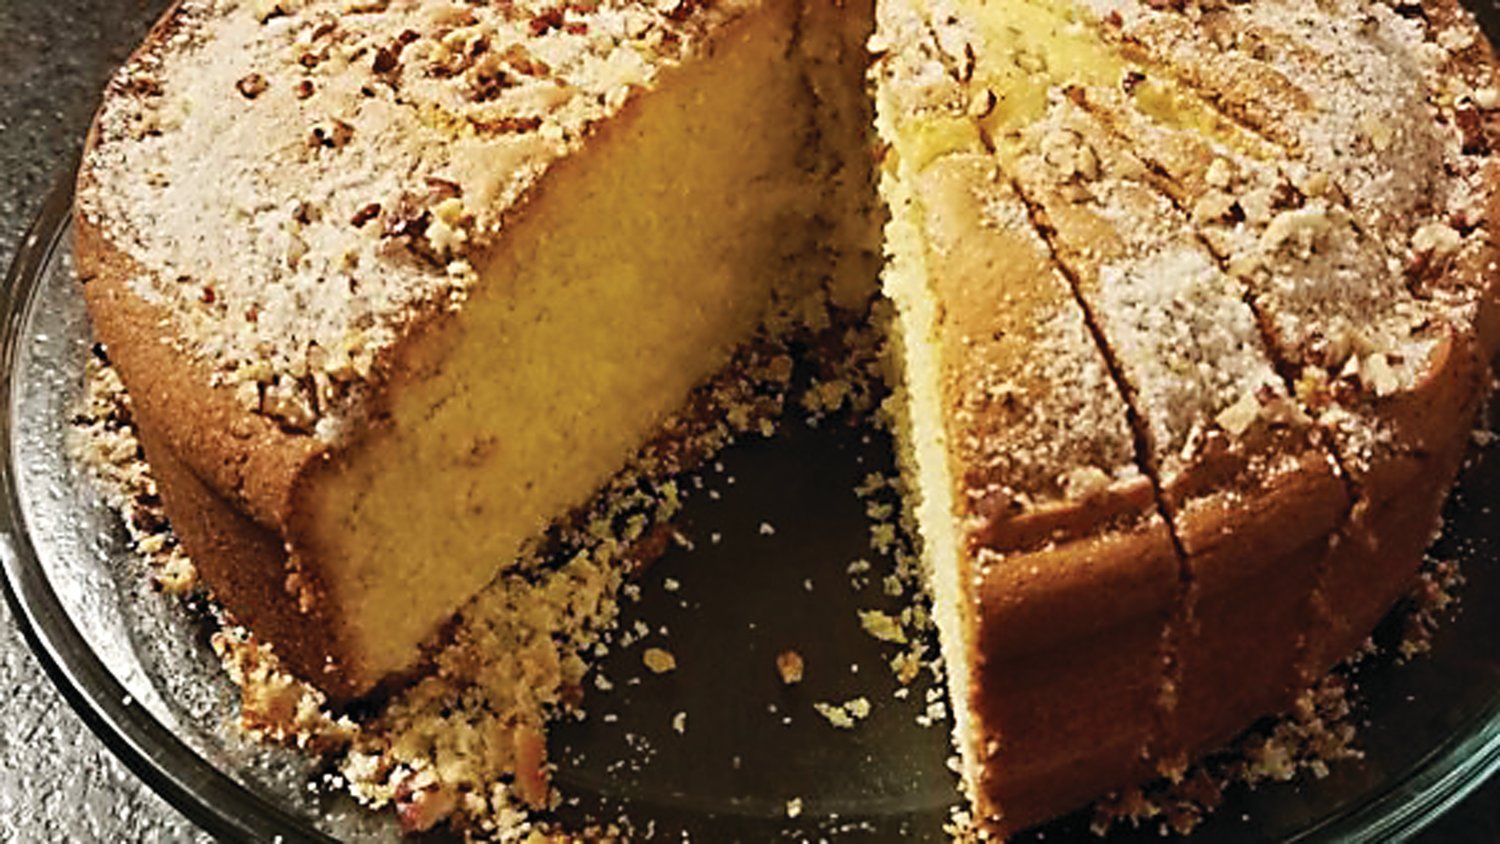 Start the new year with a bit of luck and sweetness with this Greek Valesopita – New Year’s Cake, or other lucky foods. Photograph by Allrecipes.com.